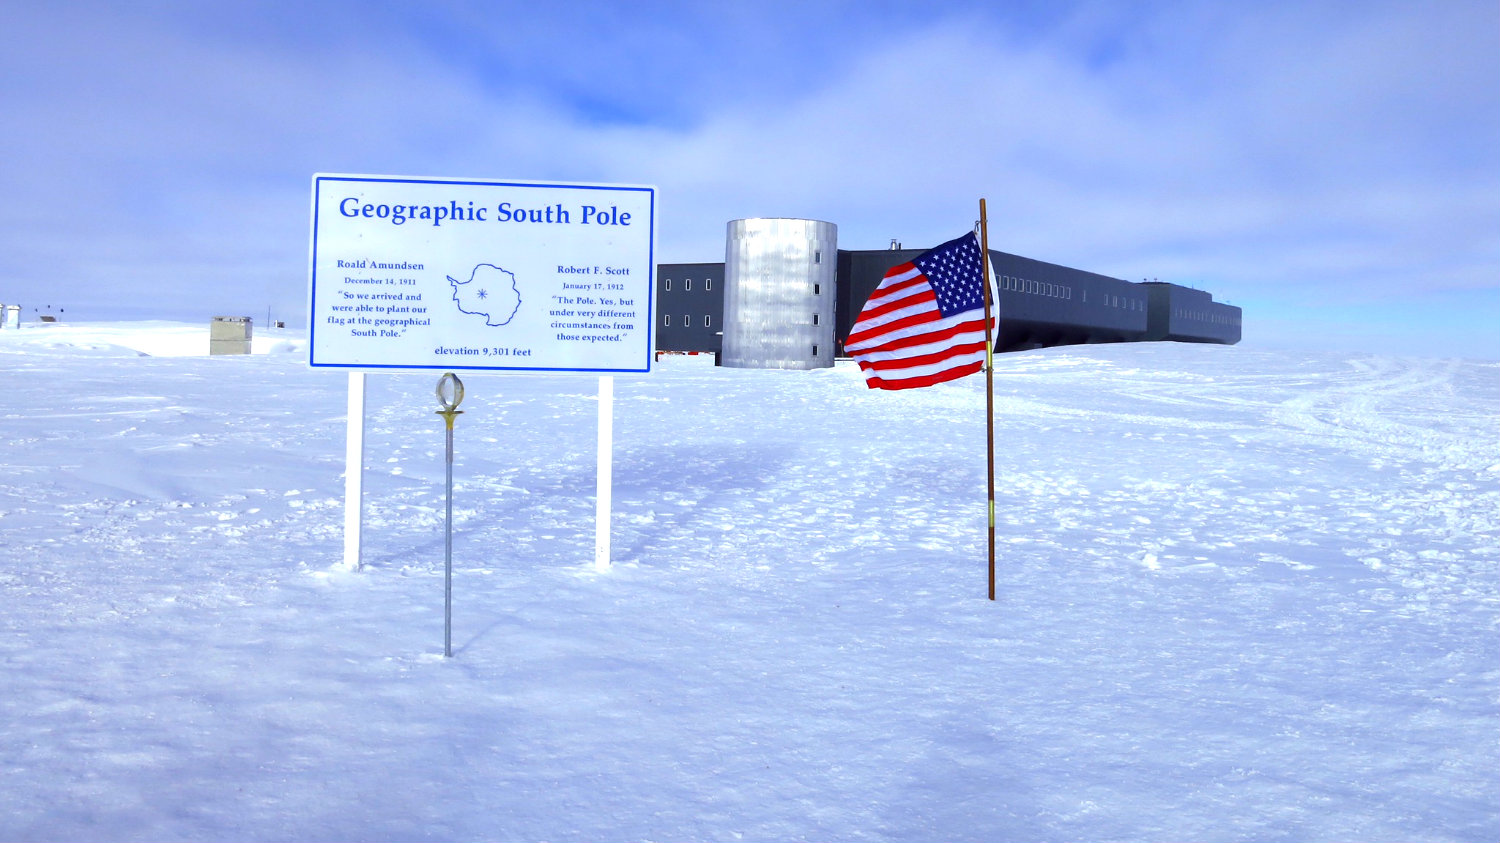 Meet The Scientists Making New Climate Discoveries And Fudge At The South Pole Grist